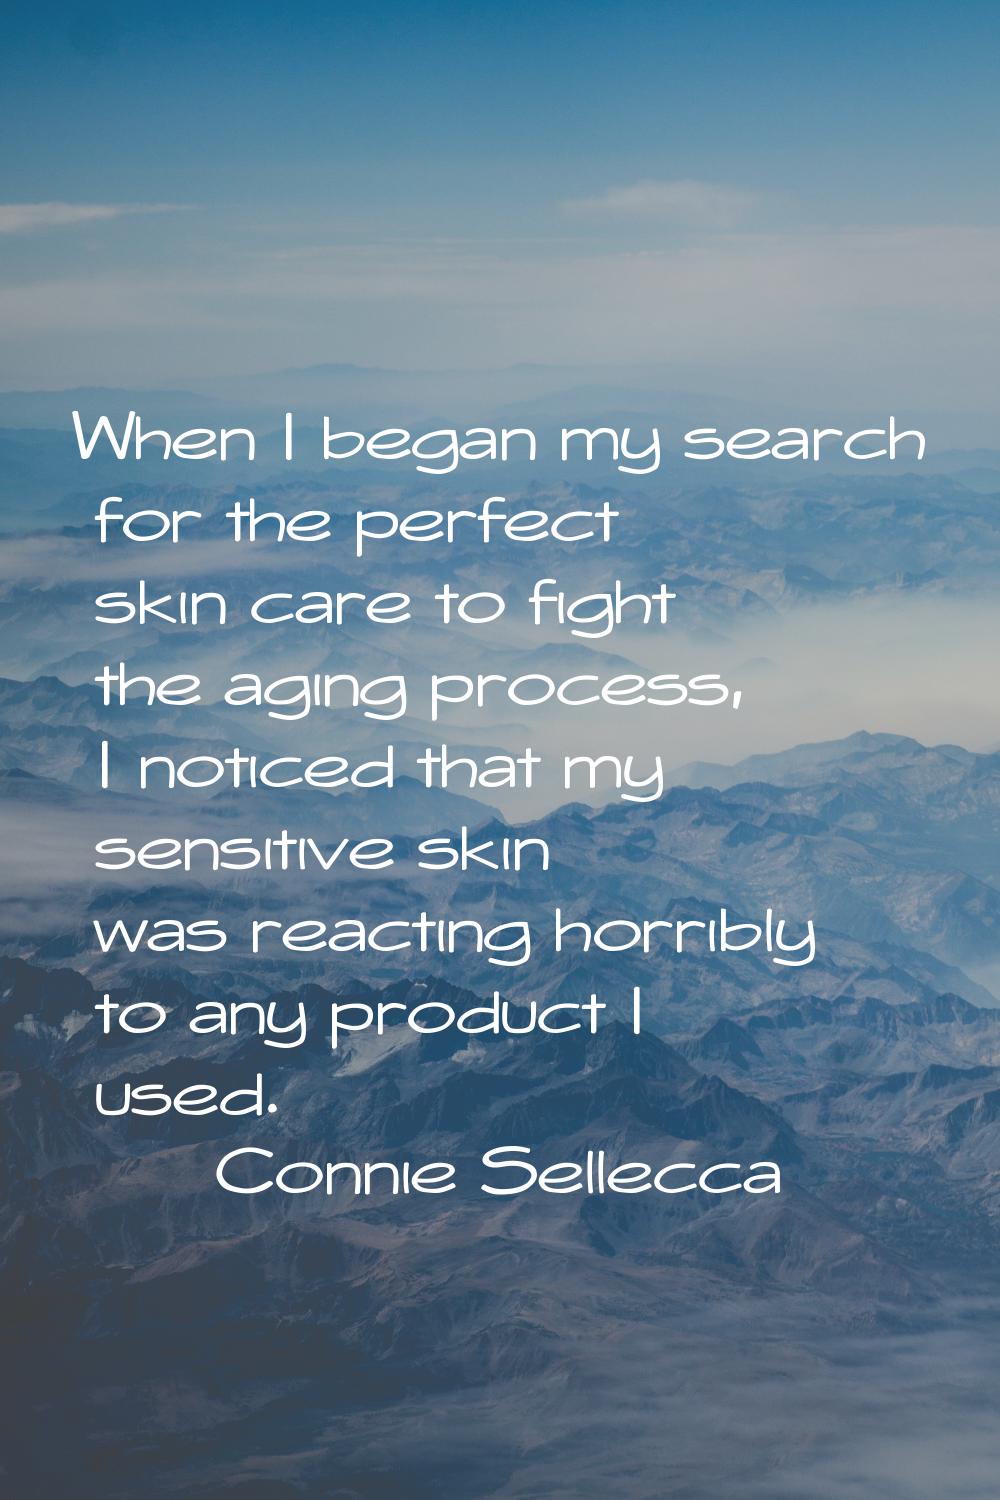 When I began my search for the perfect skin care to fight the aging process, I noticed that my sens